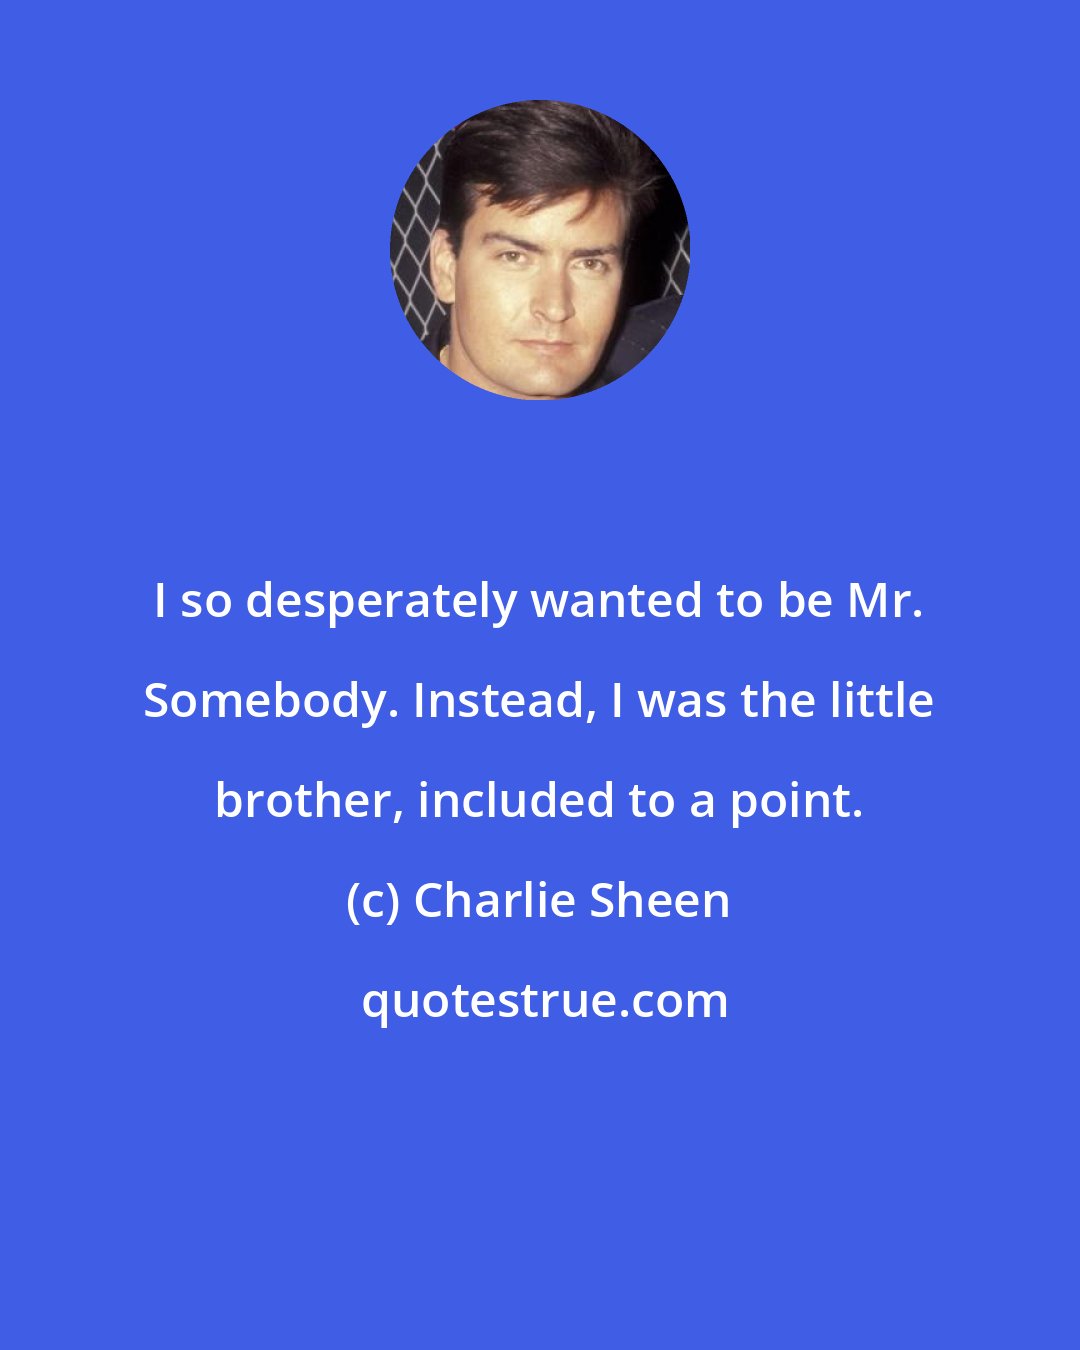 Charlie Sheen: I so desperately wanted to be Mr. Somebody. Instead, I was the little brother, included to a point.